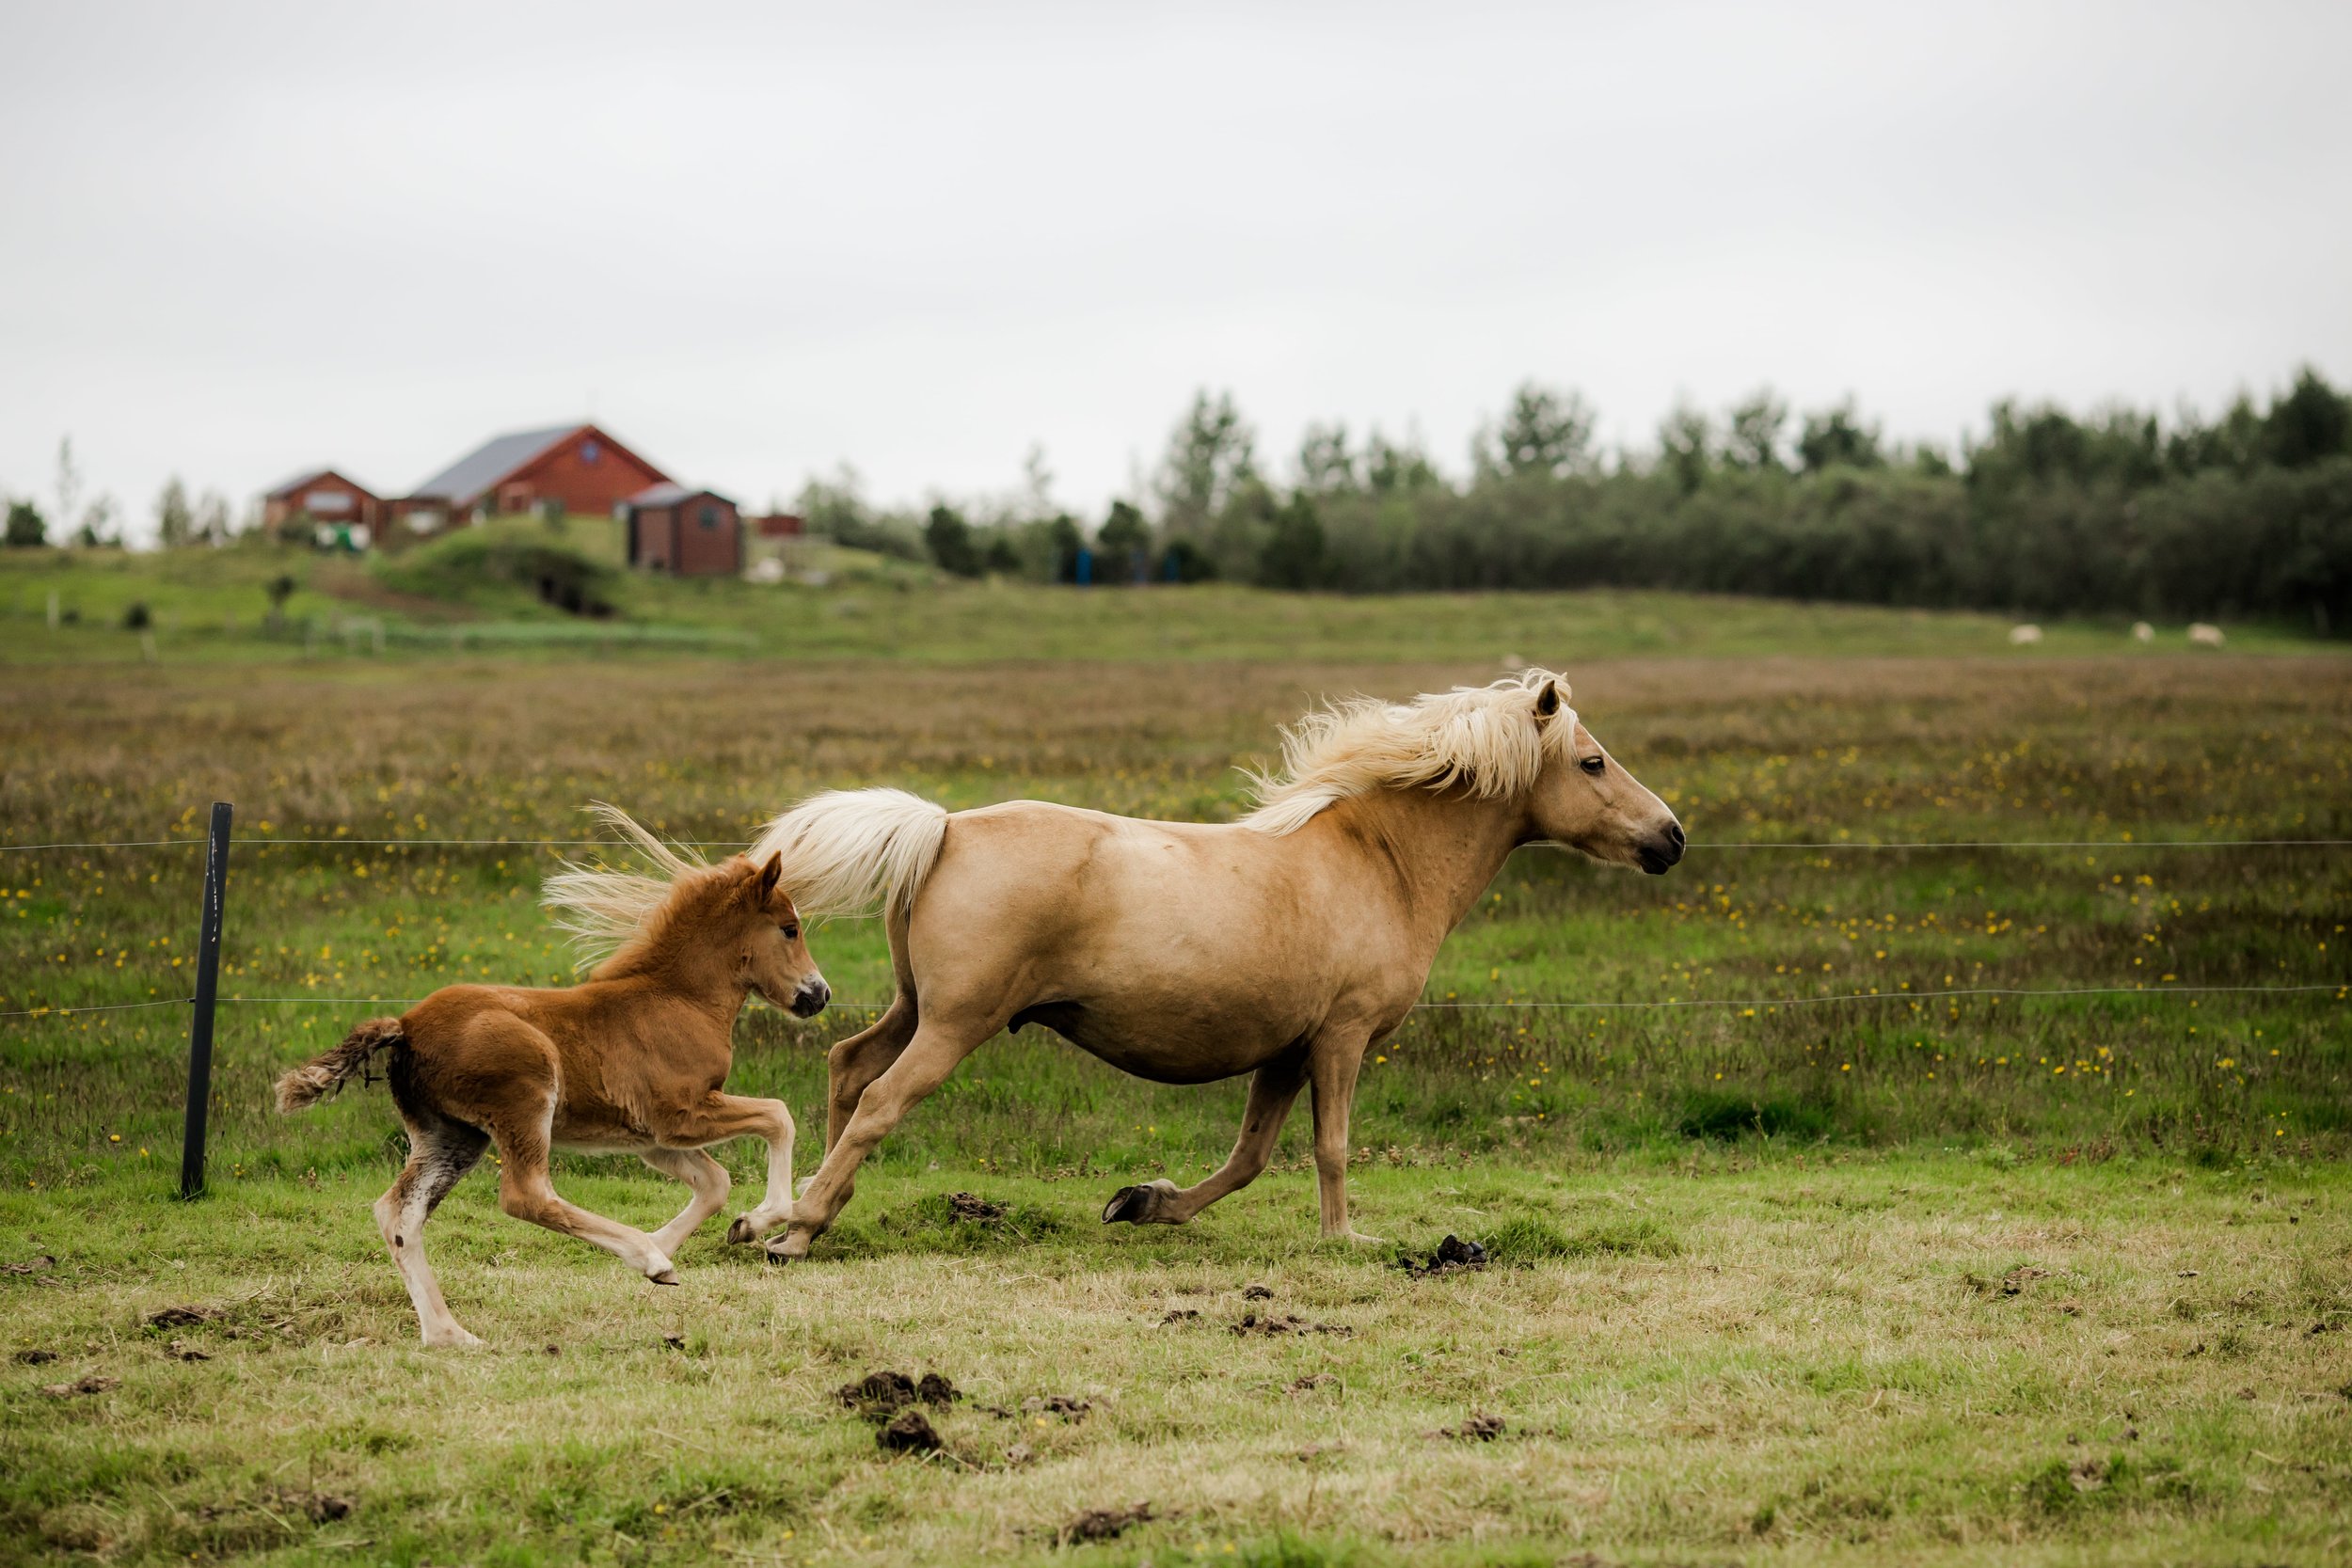 Horses in Iceland by Christina Swanson now on Cottage Hill65.jpg